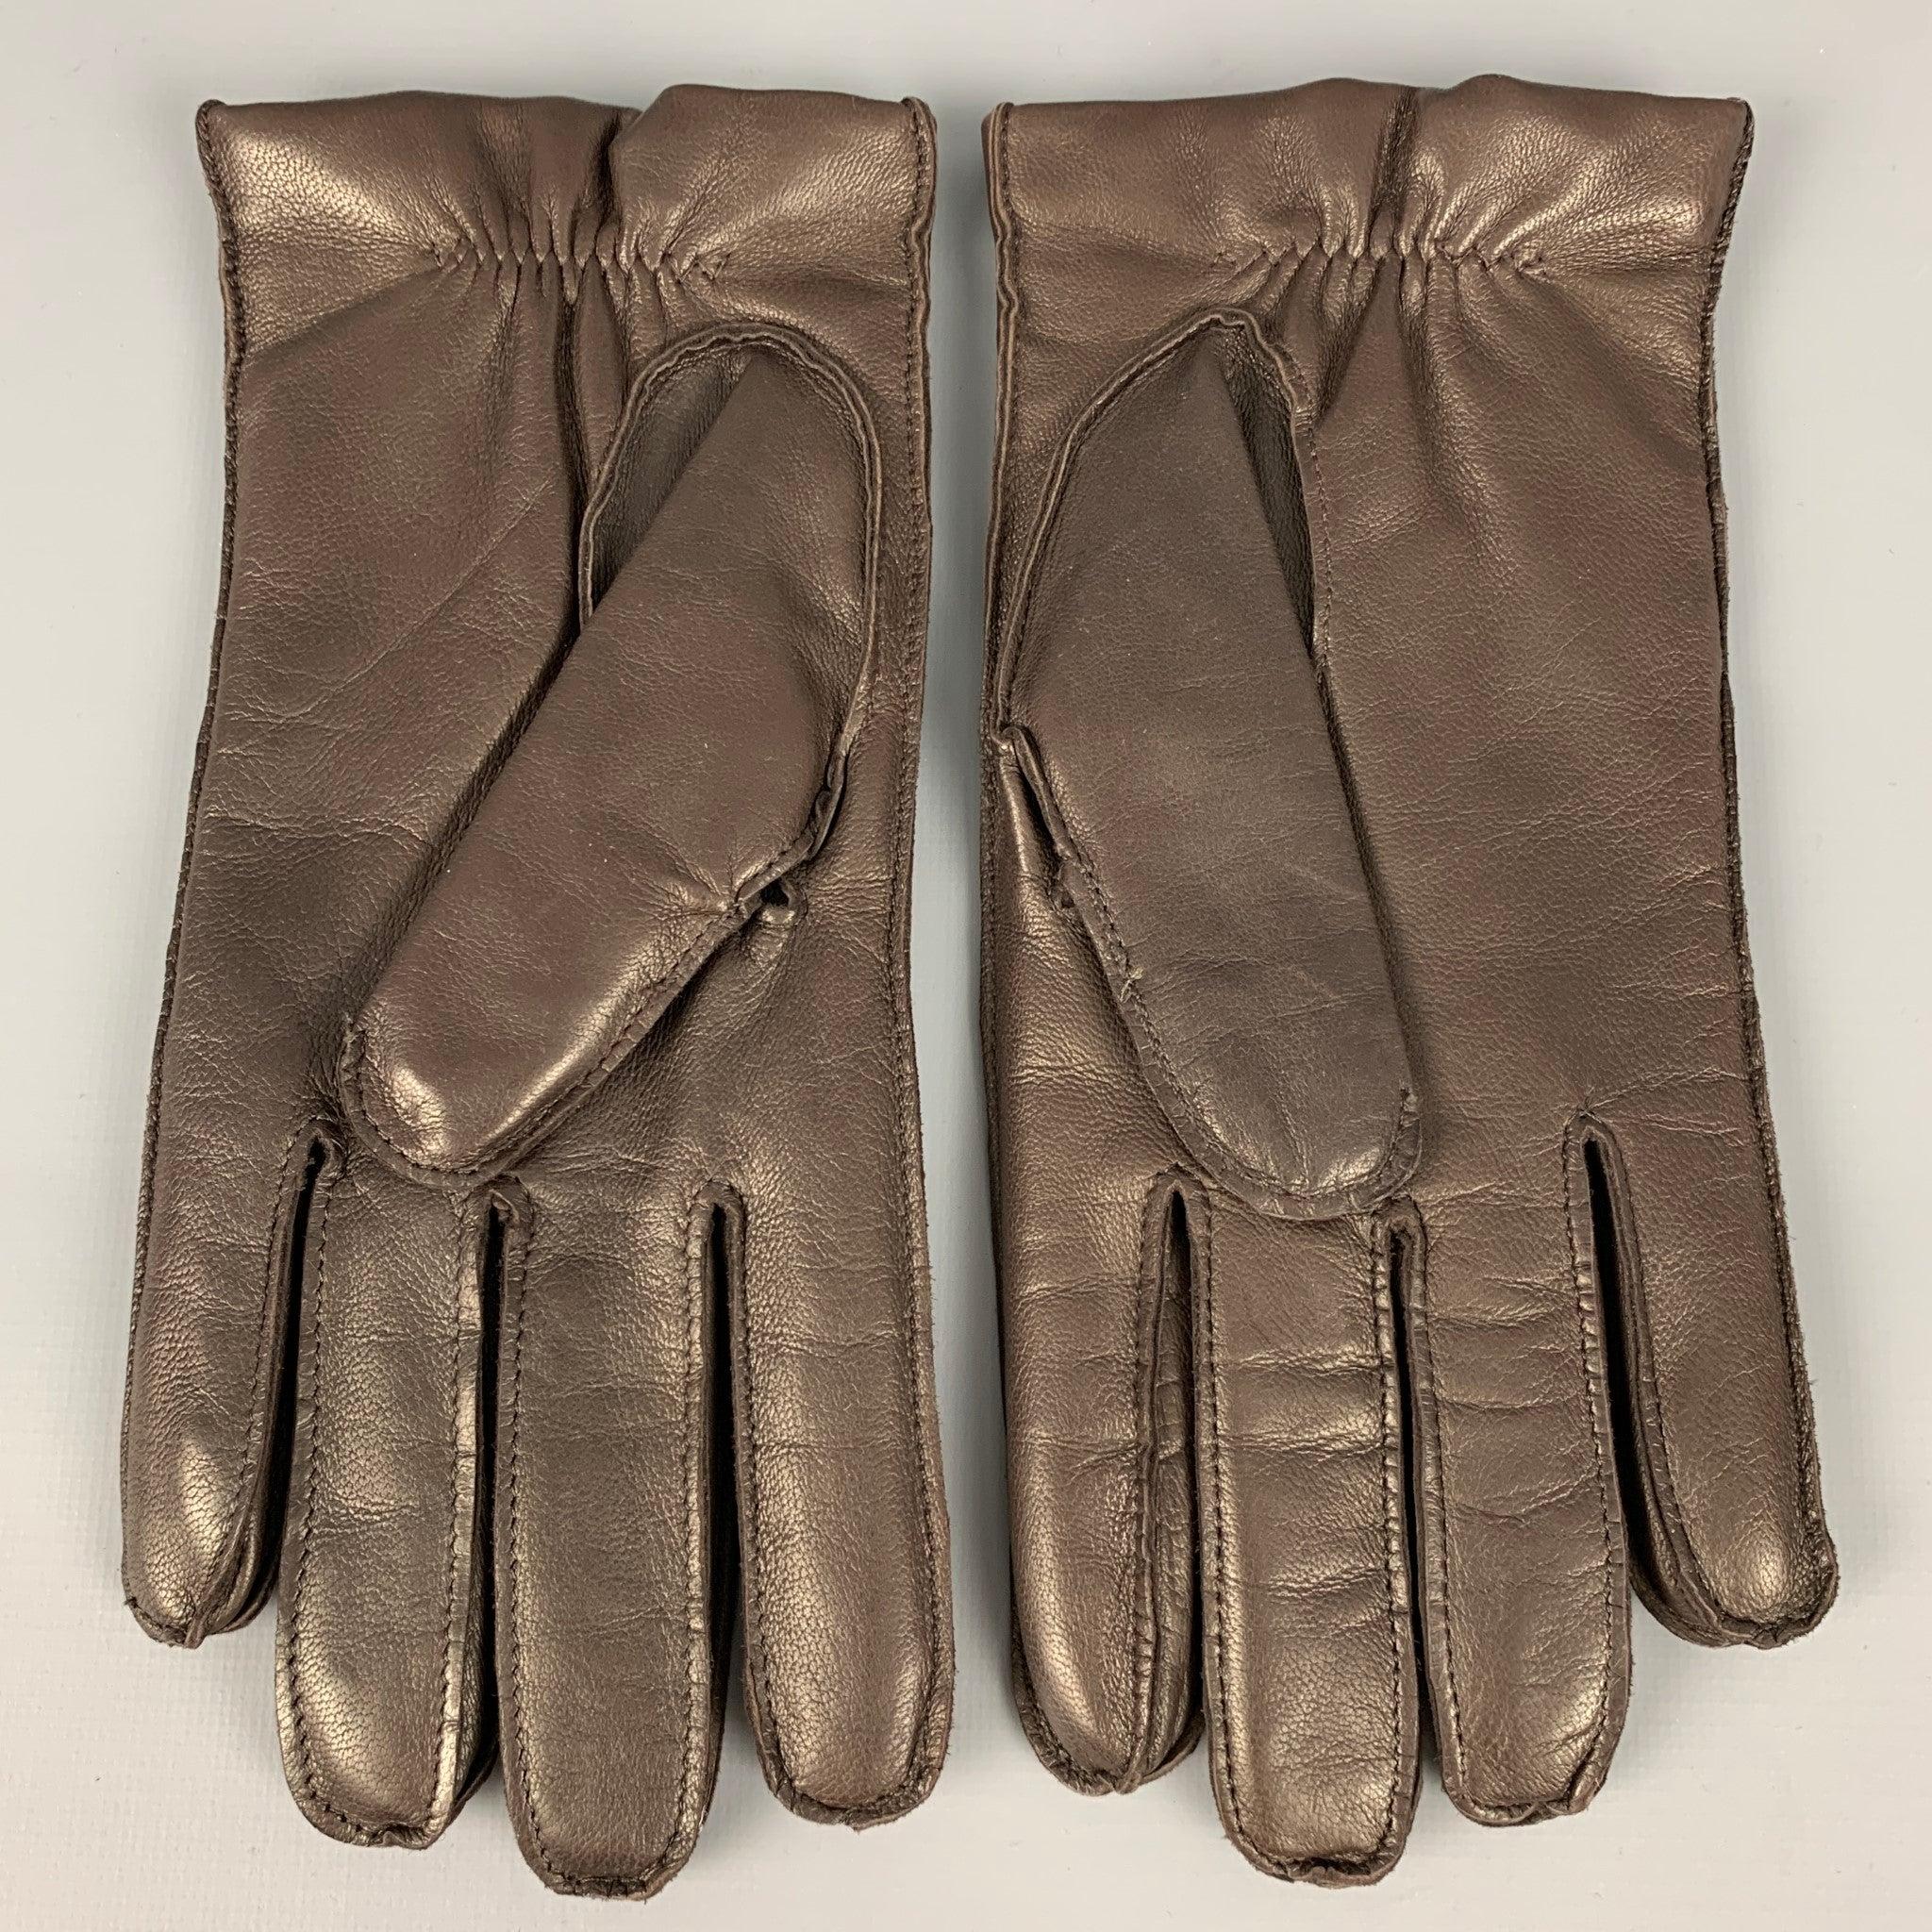 PURPLE LABEL by RALPH LAUREN
gloves in a brown leather with a cashmere lining. Made in Italy.Excellent Pre-Owned Condition. 

Marked:   9 

Measurements: 
  Width: 4 inches Length: 9 in
  
  
 
Reference: 125208
Category: Gloves
More Details
   